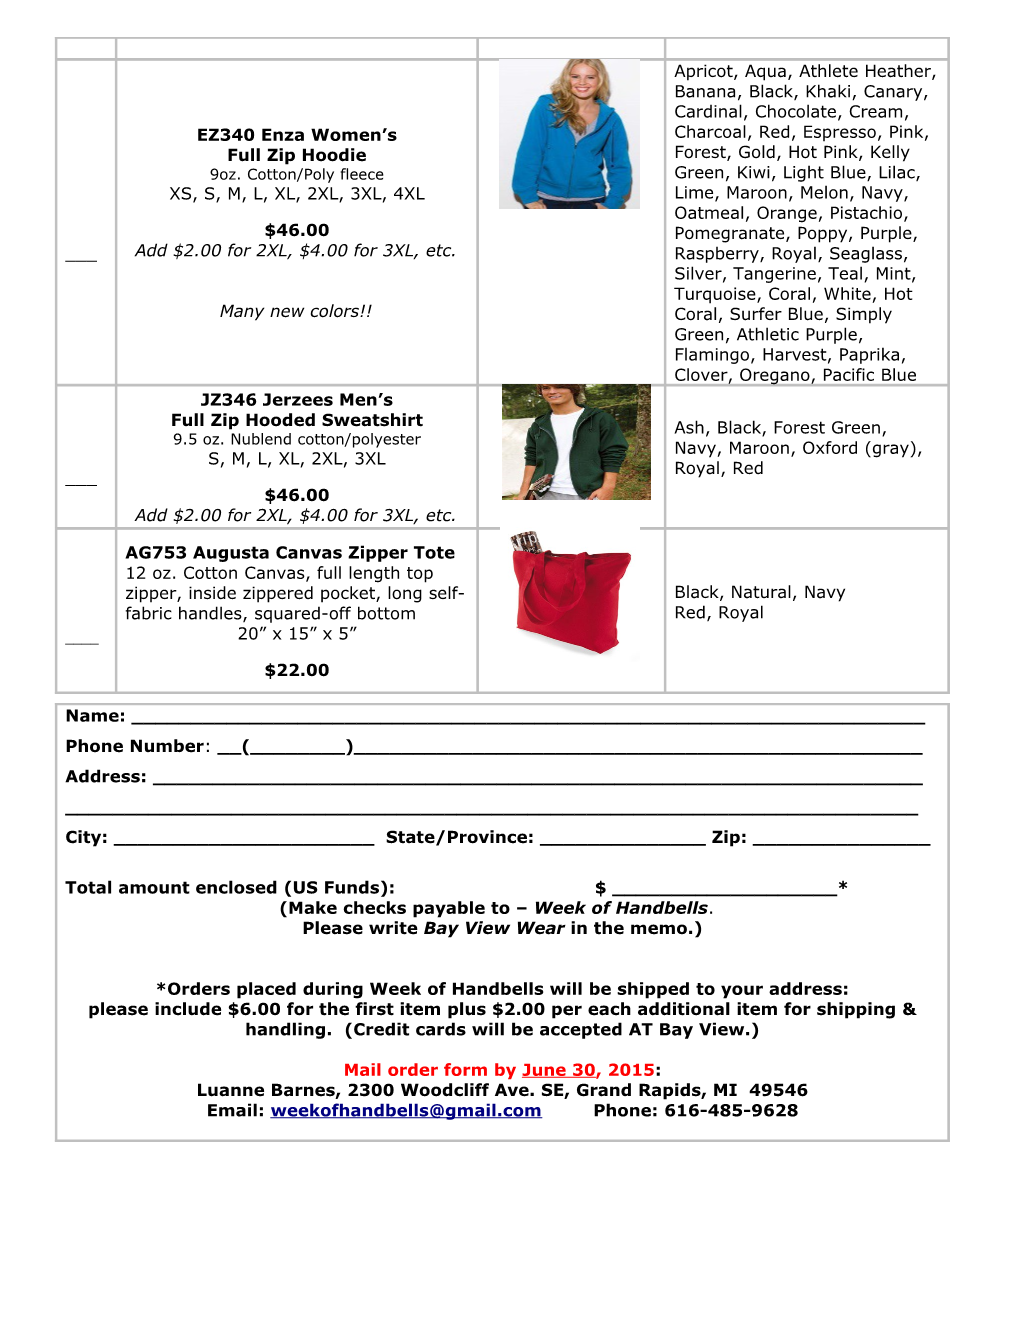 Bay View 2015Wear Order Form